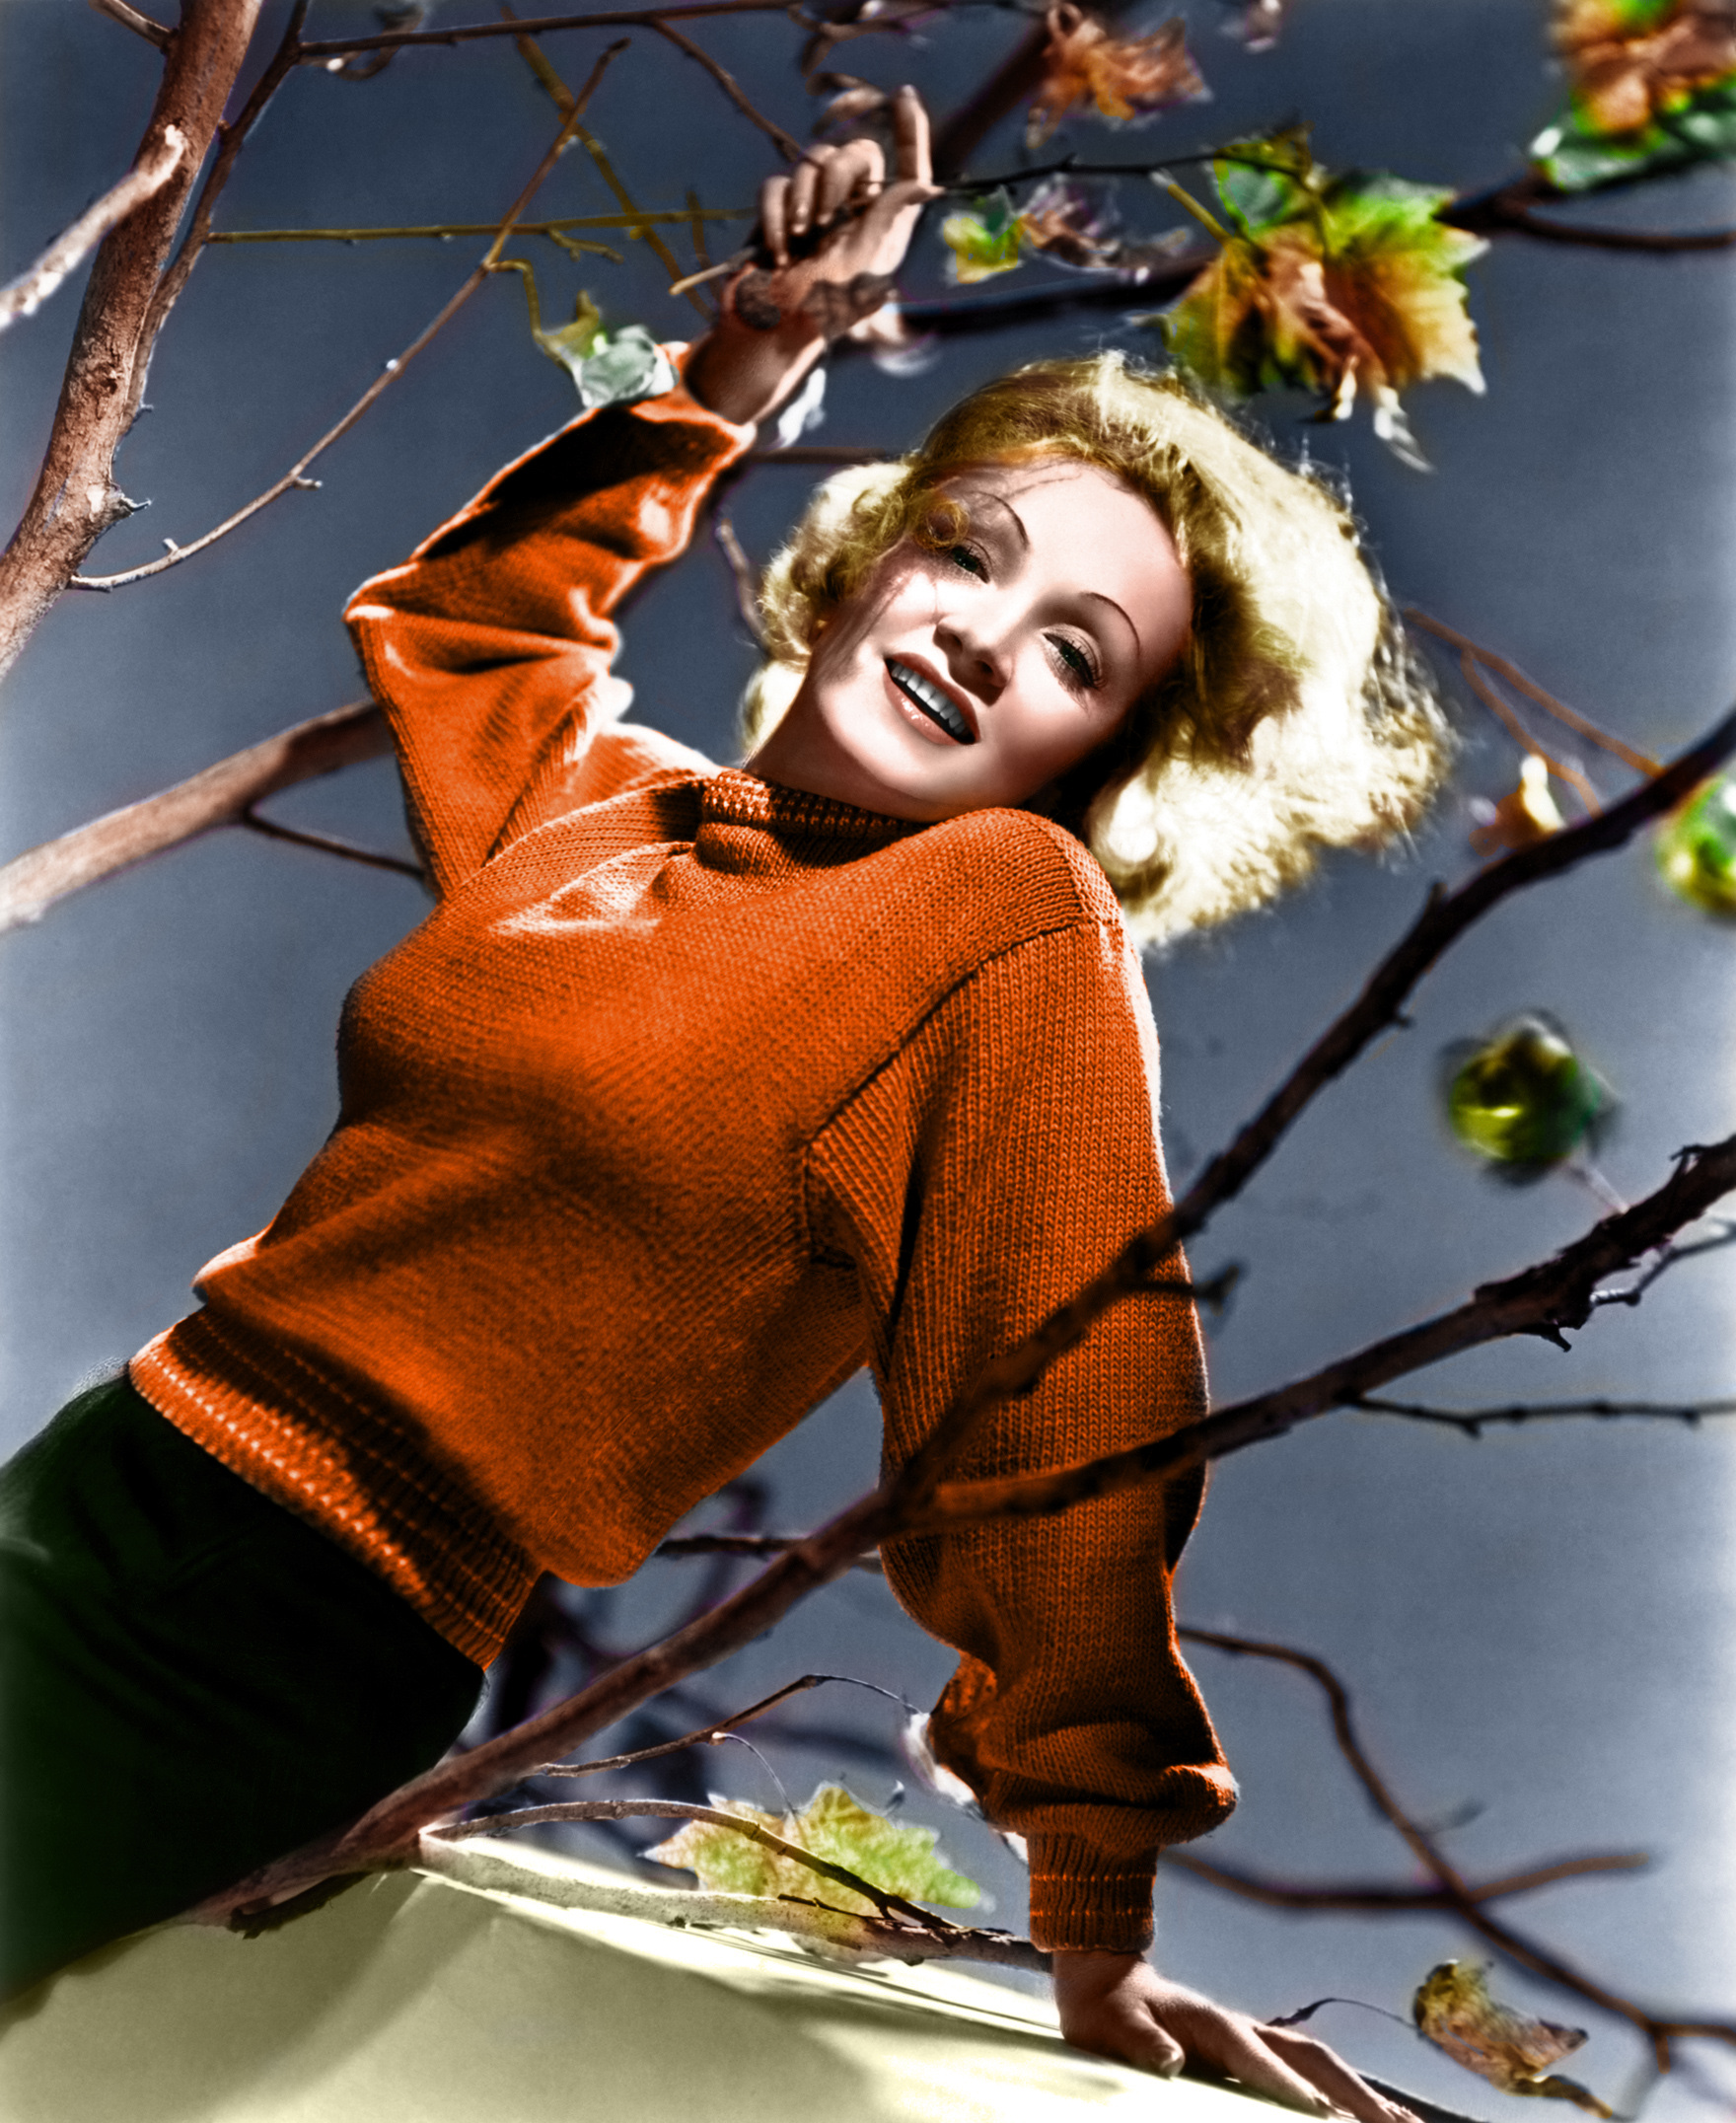 Classic Actresses Image Marlene Dietrich Color HD Wallpaper And